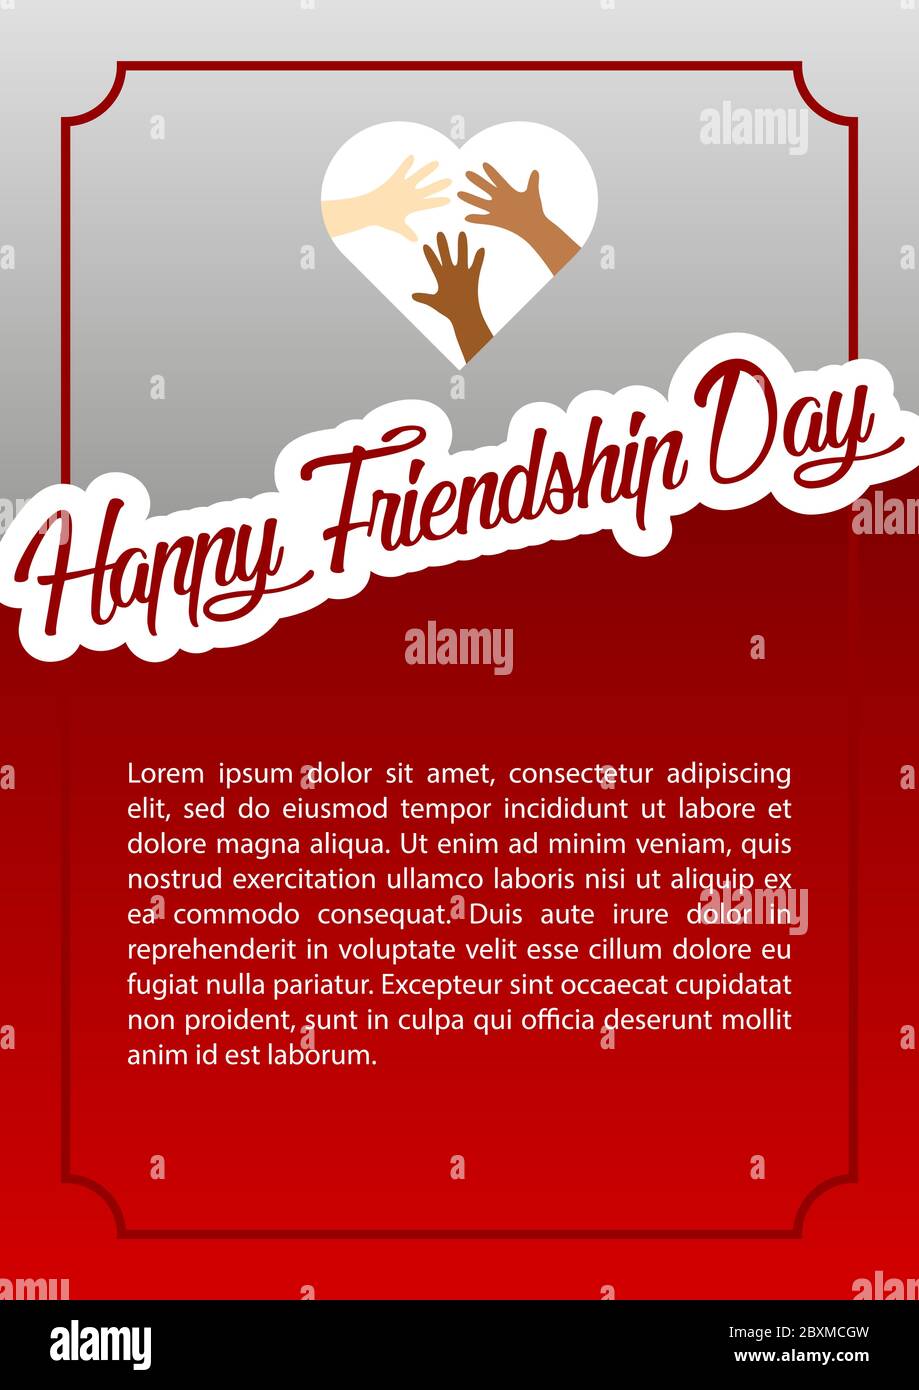 Vector illustration beautiful card for friendship day with holding ...